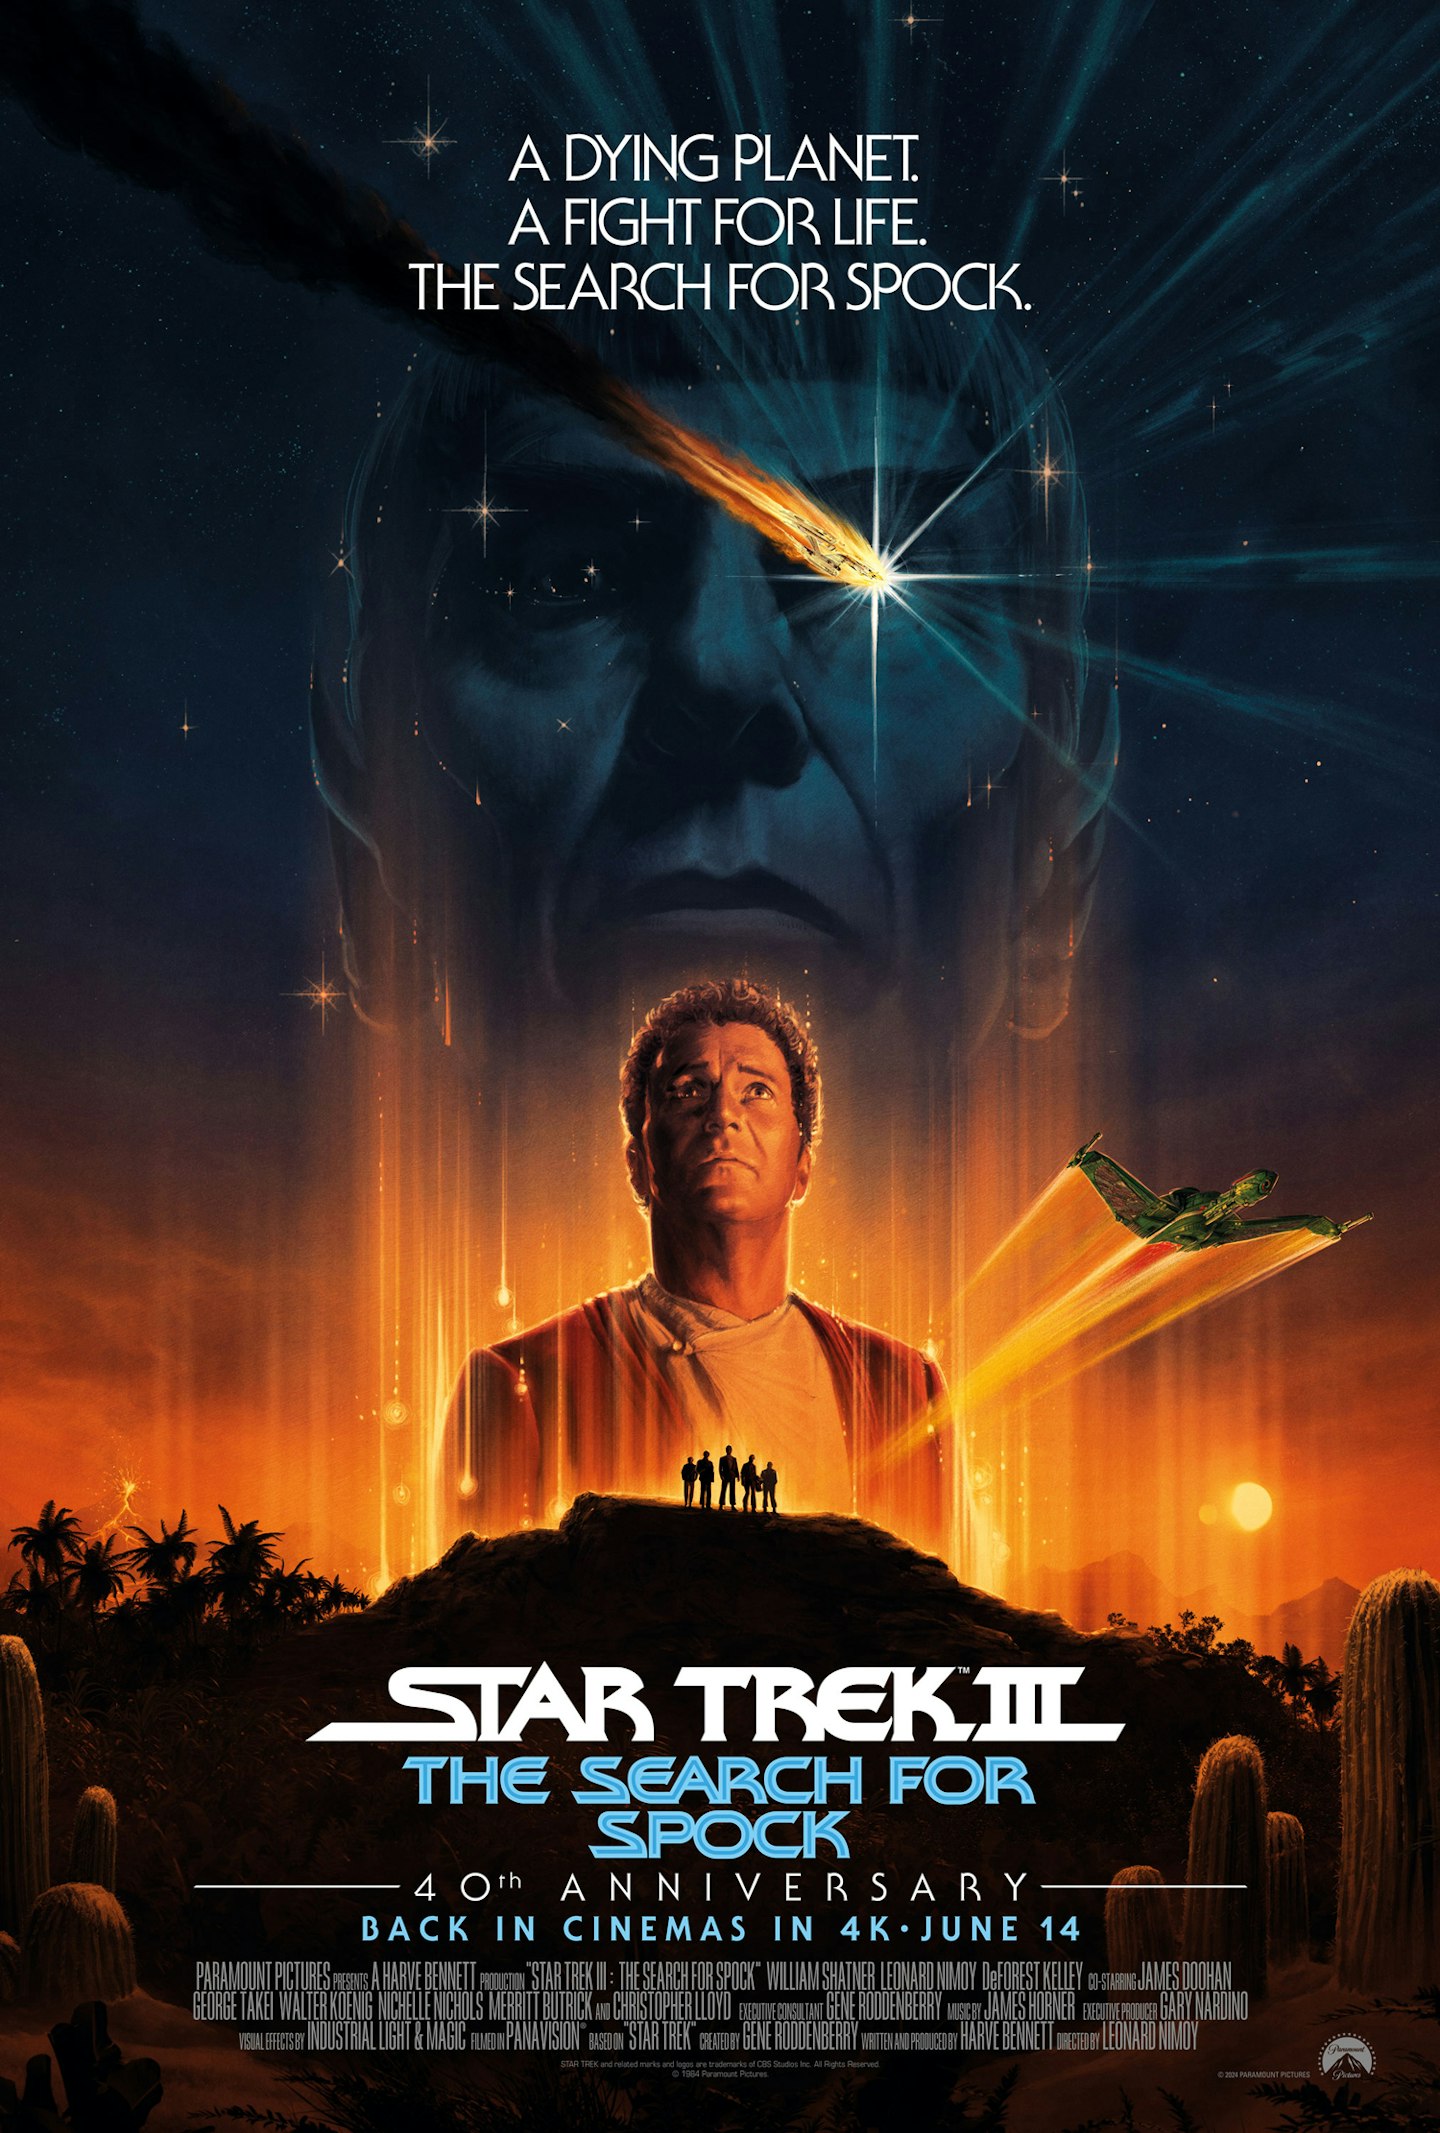 Star Trek III: The Search For Spock – poster